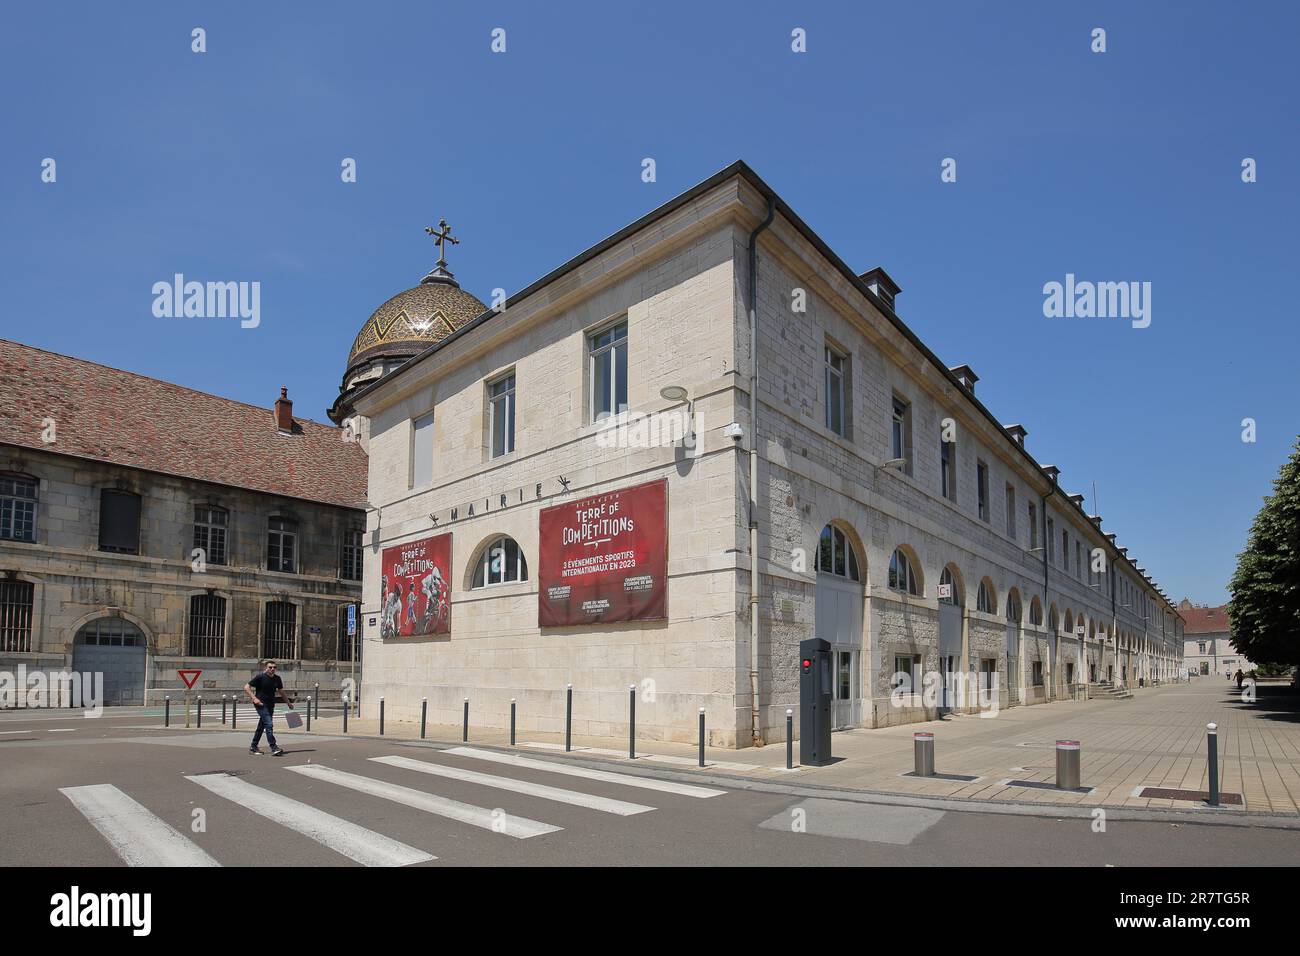 Mairie building, city administration, city hall, Besancon, Doubs, France Stock Photo